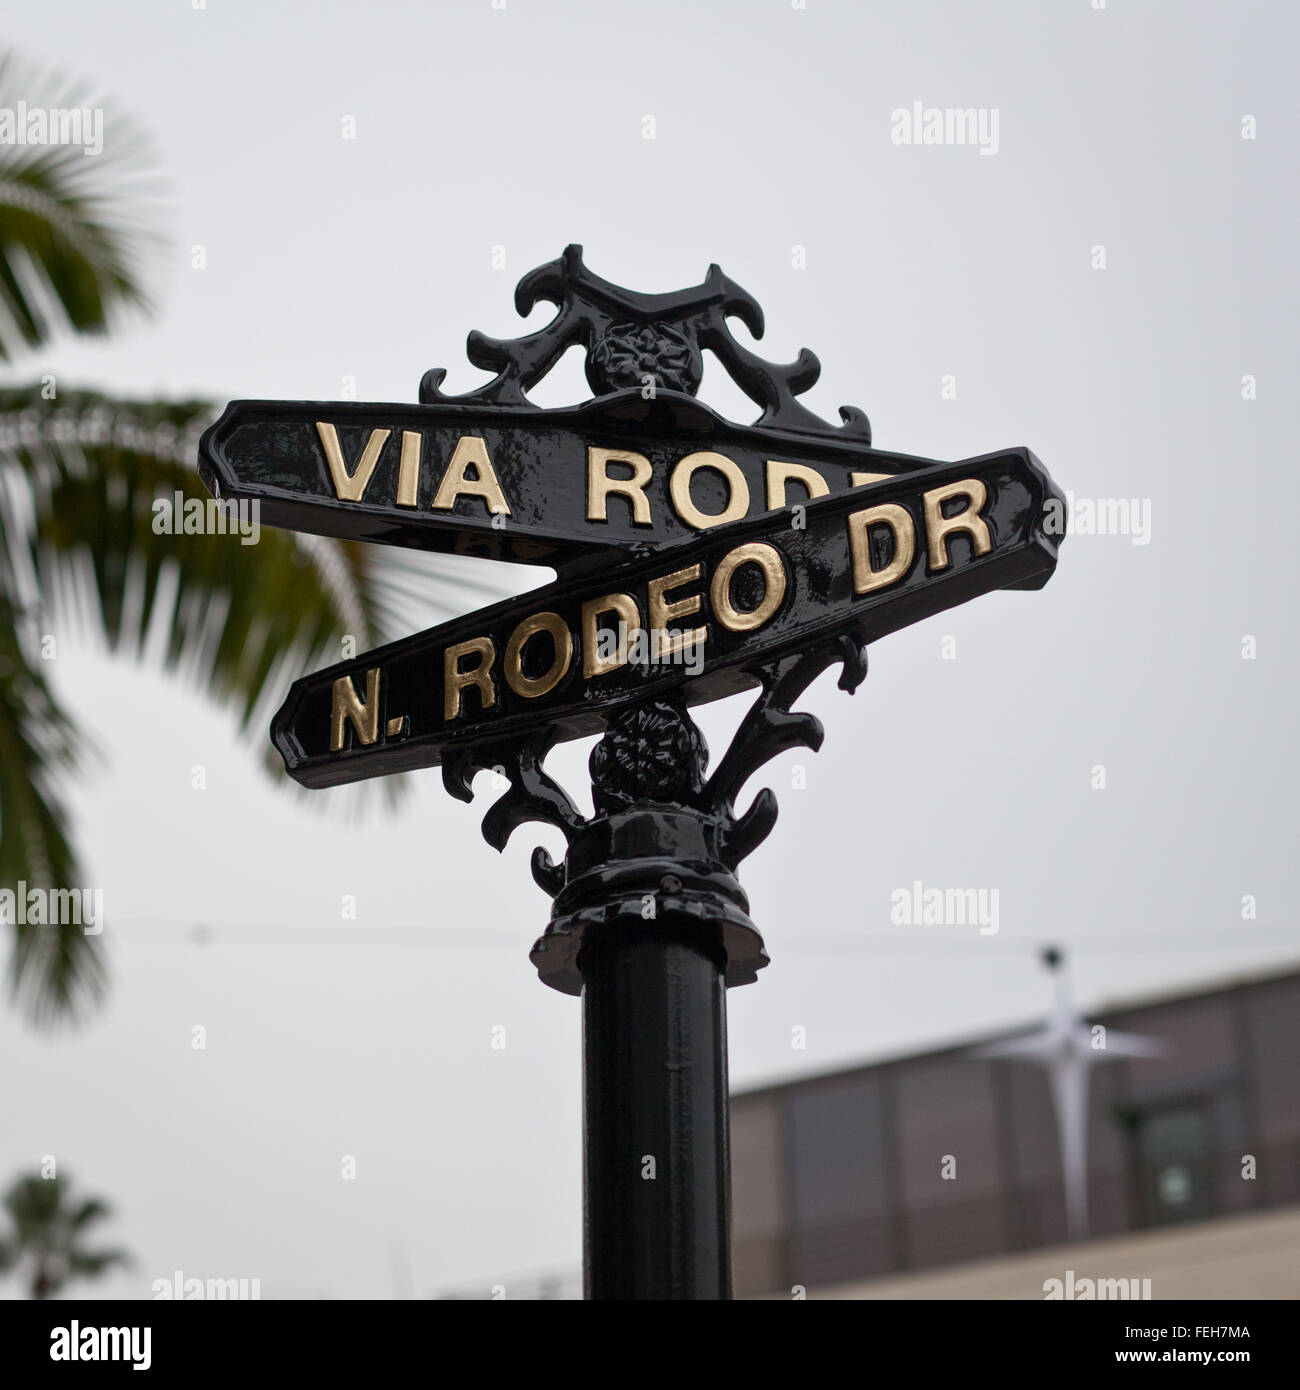 Rodeo Drive Cross Street Signs Stock Photo, Picture and Royalty Free Image.  Image 56530324.